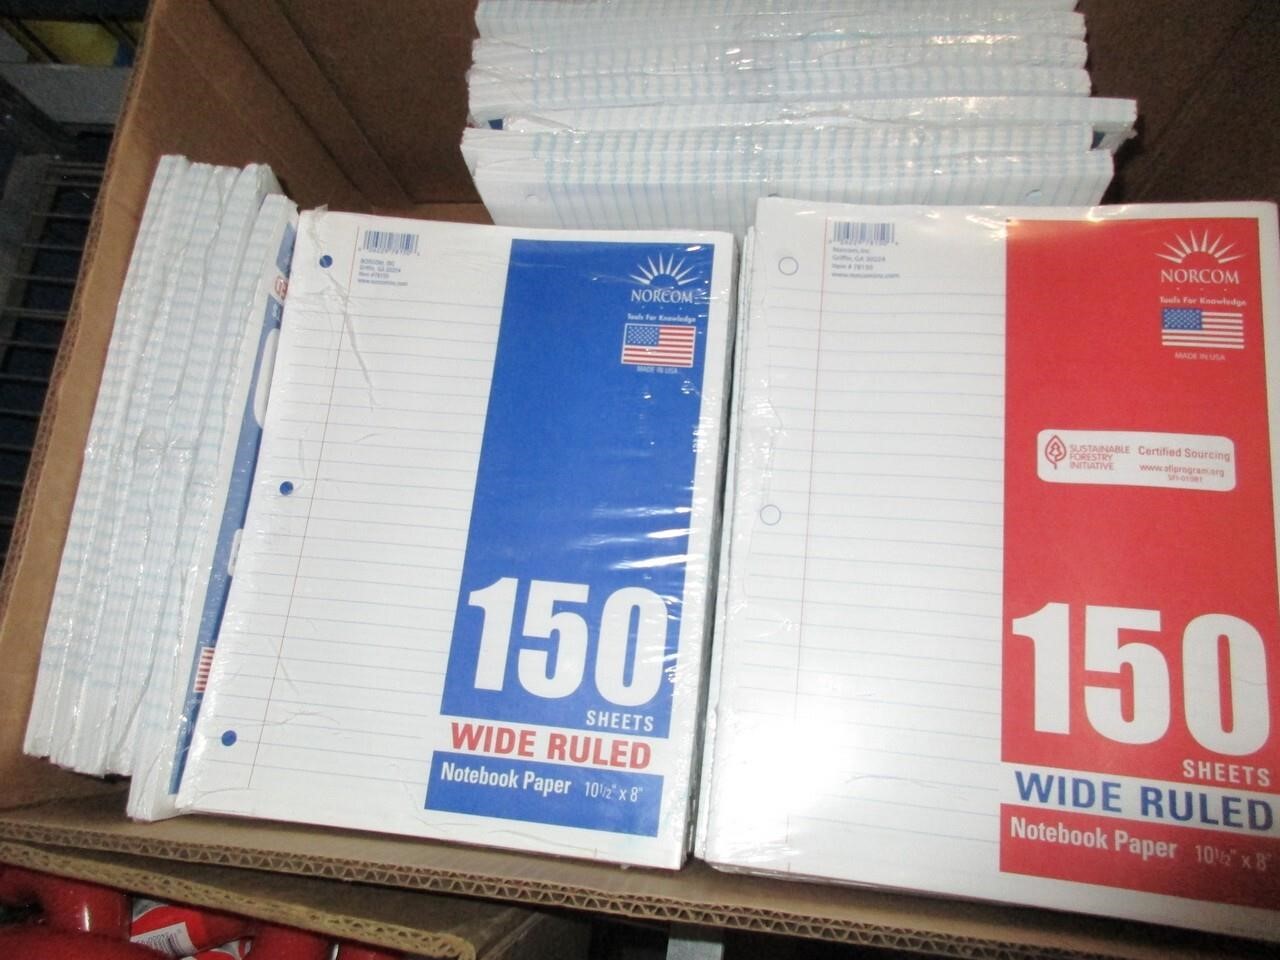 43 New Packs Notebook Paper